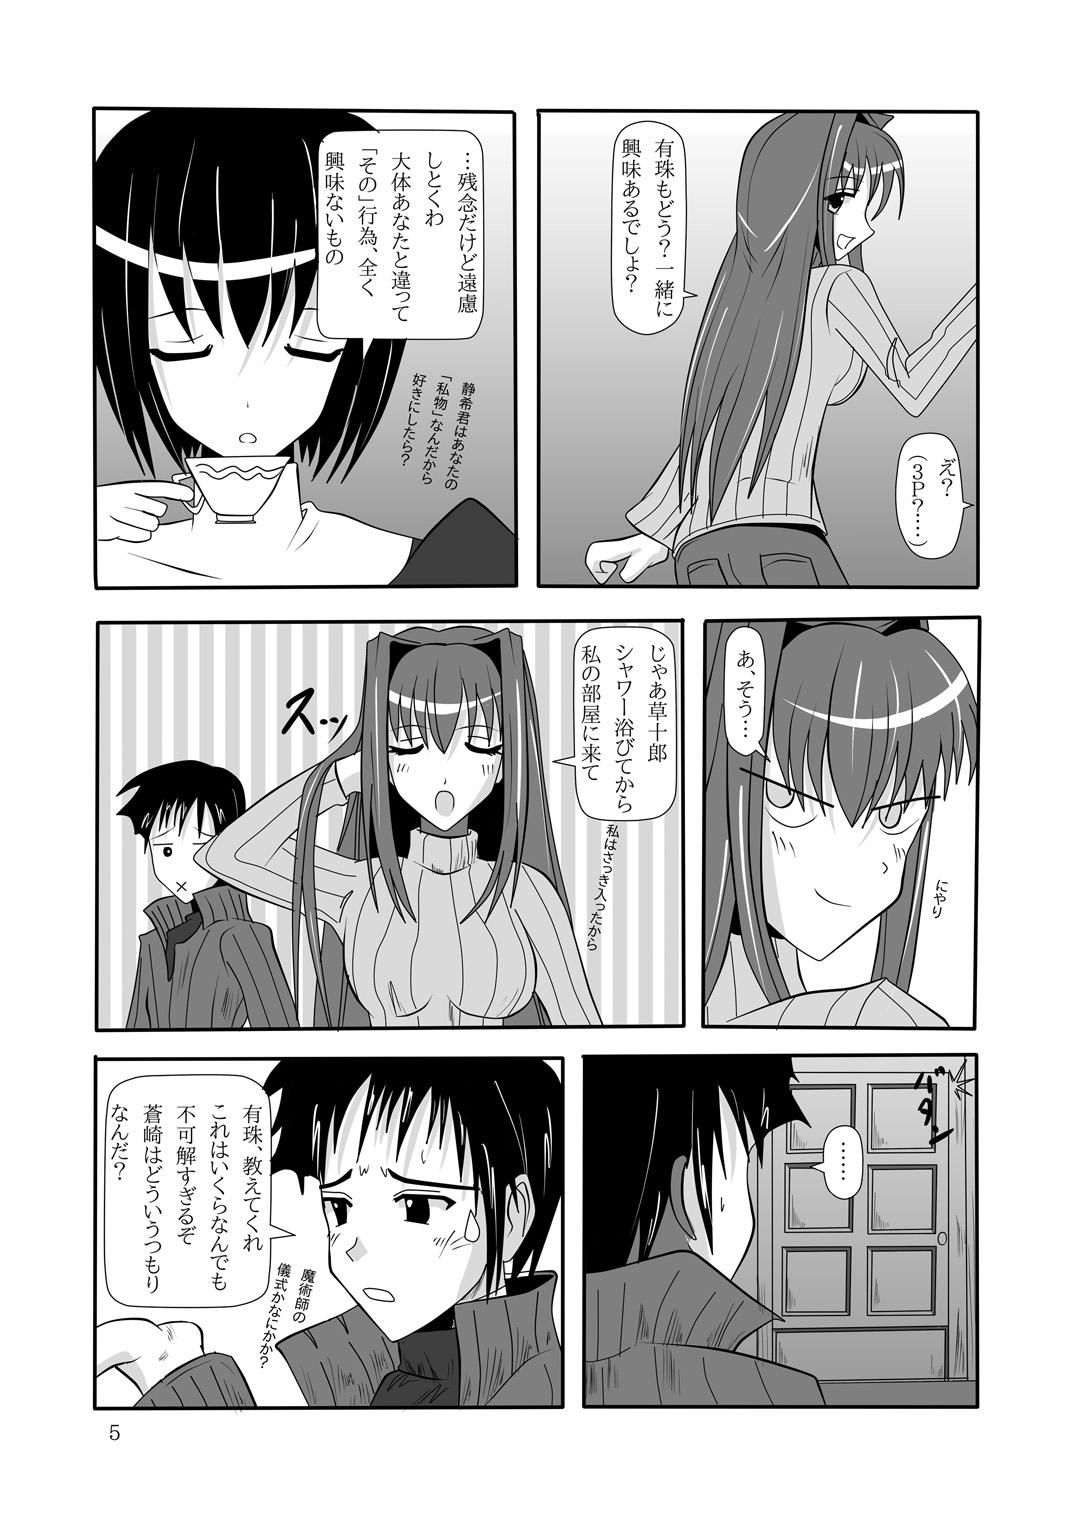 Roughsex smells like teen spirit - Mahou tsukai no yoru | witch on the holy night Sixtynine - Page 6